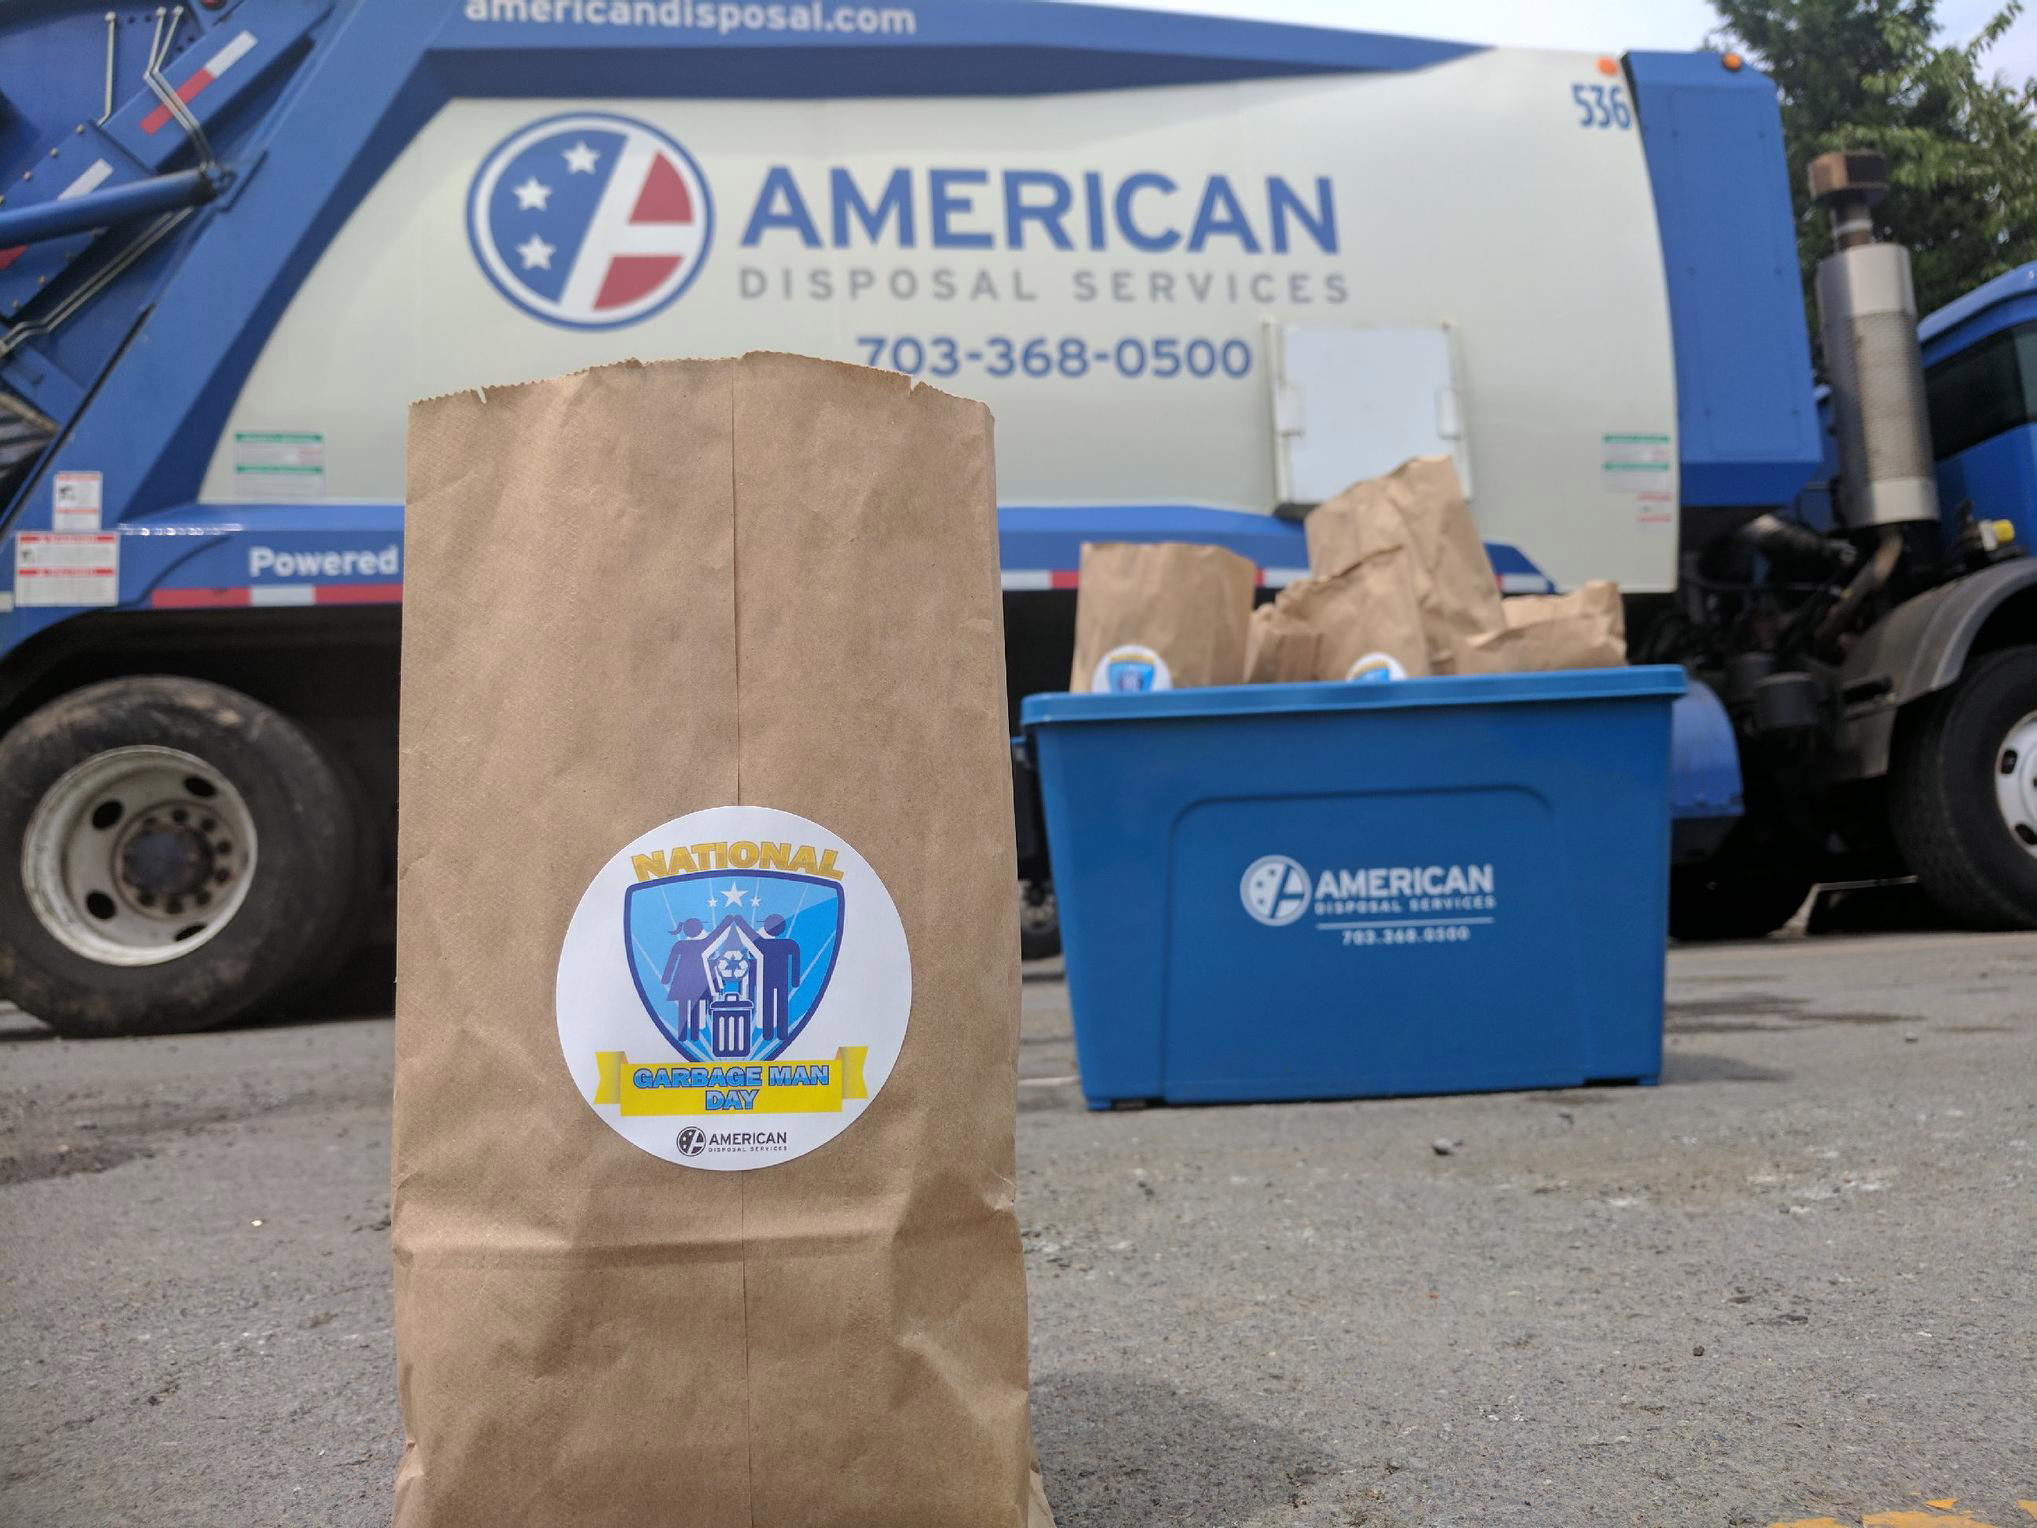 American Disposal Services celebrates its drivers and helpers